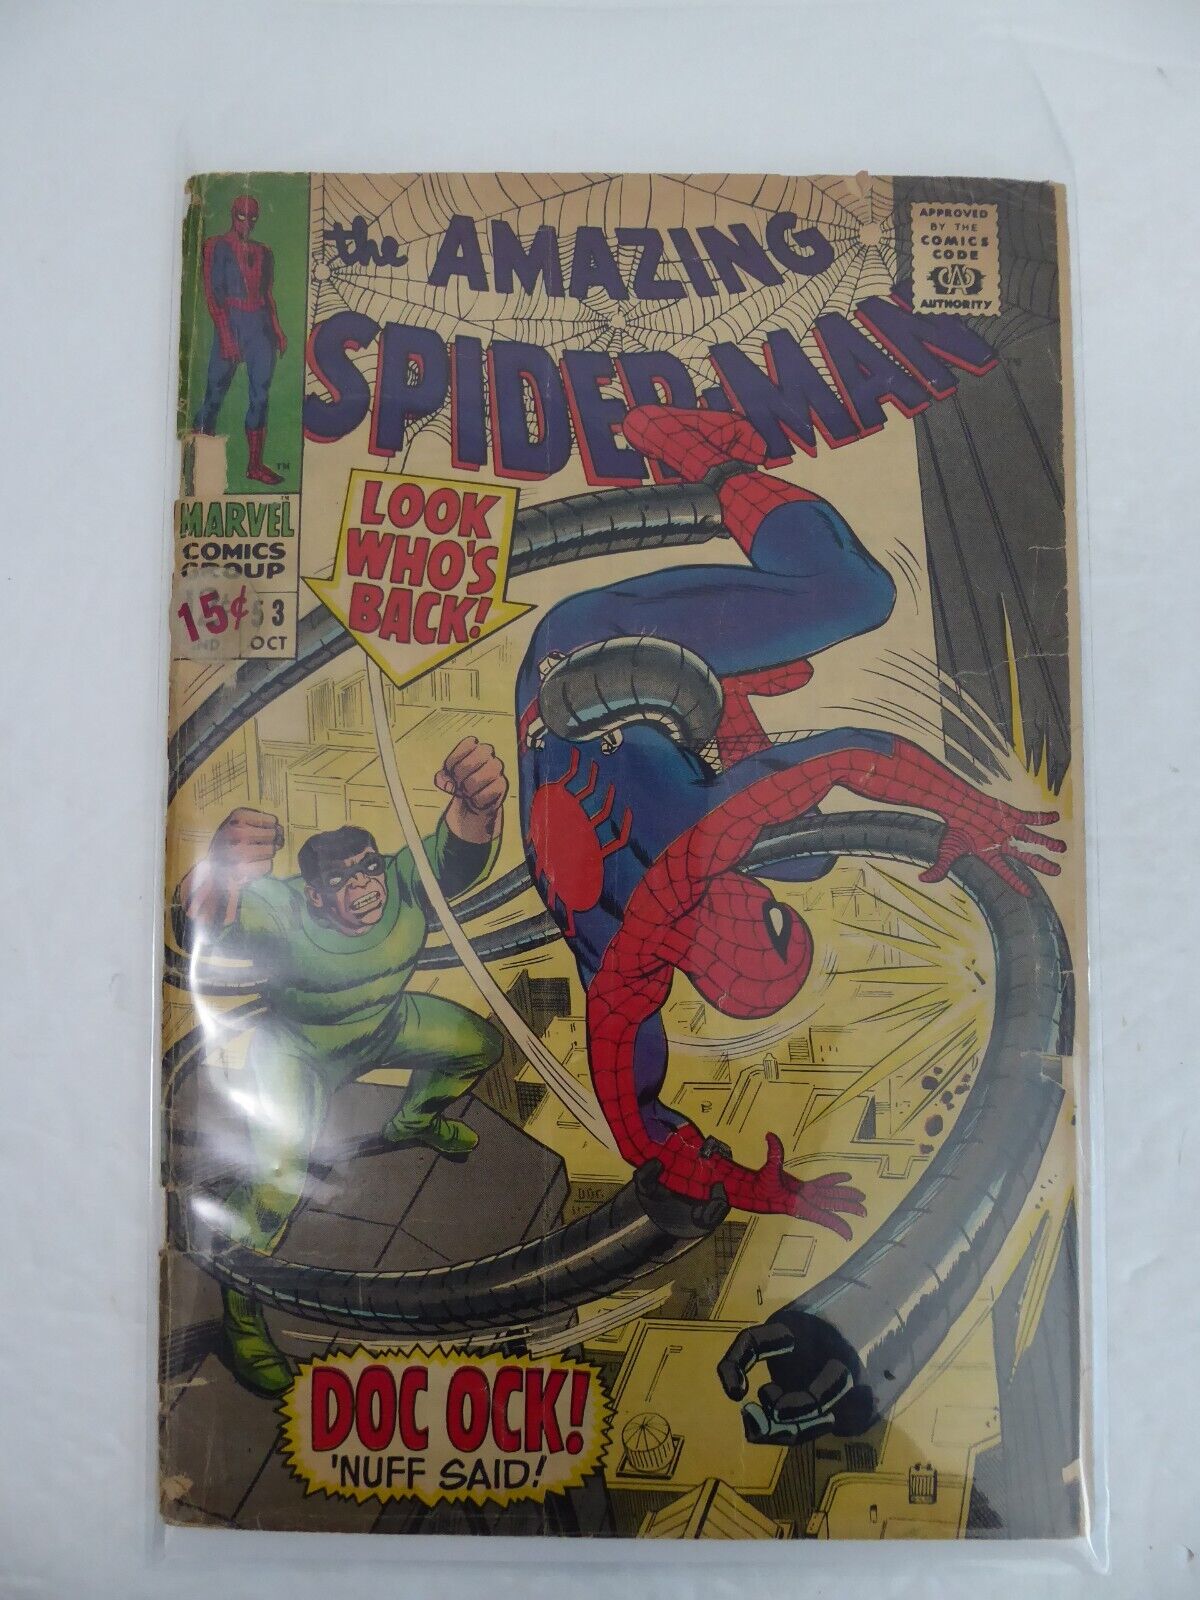 Amazing Spider-Man #53 Doctor Octopus Peter & Gwen Stacy\'s 1st Date 1967